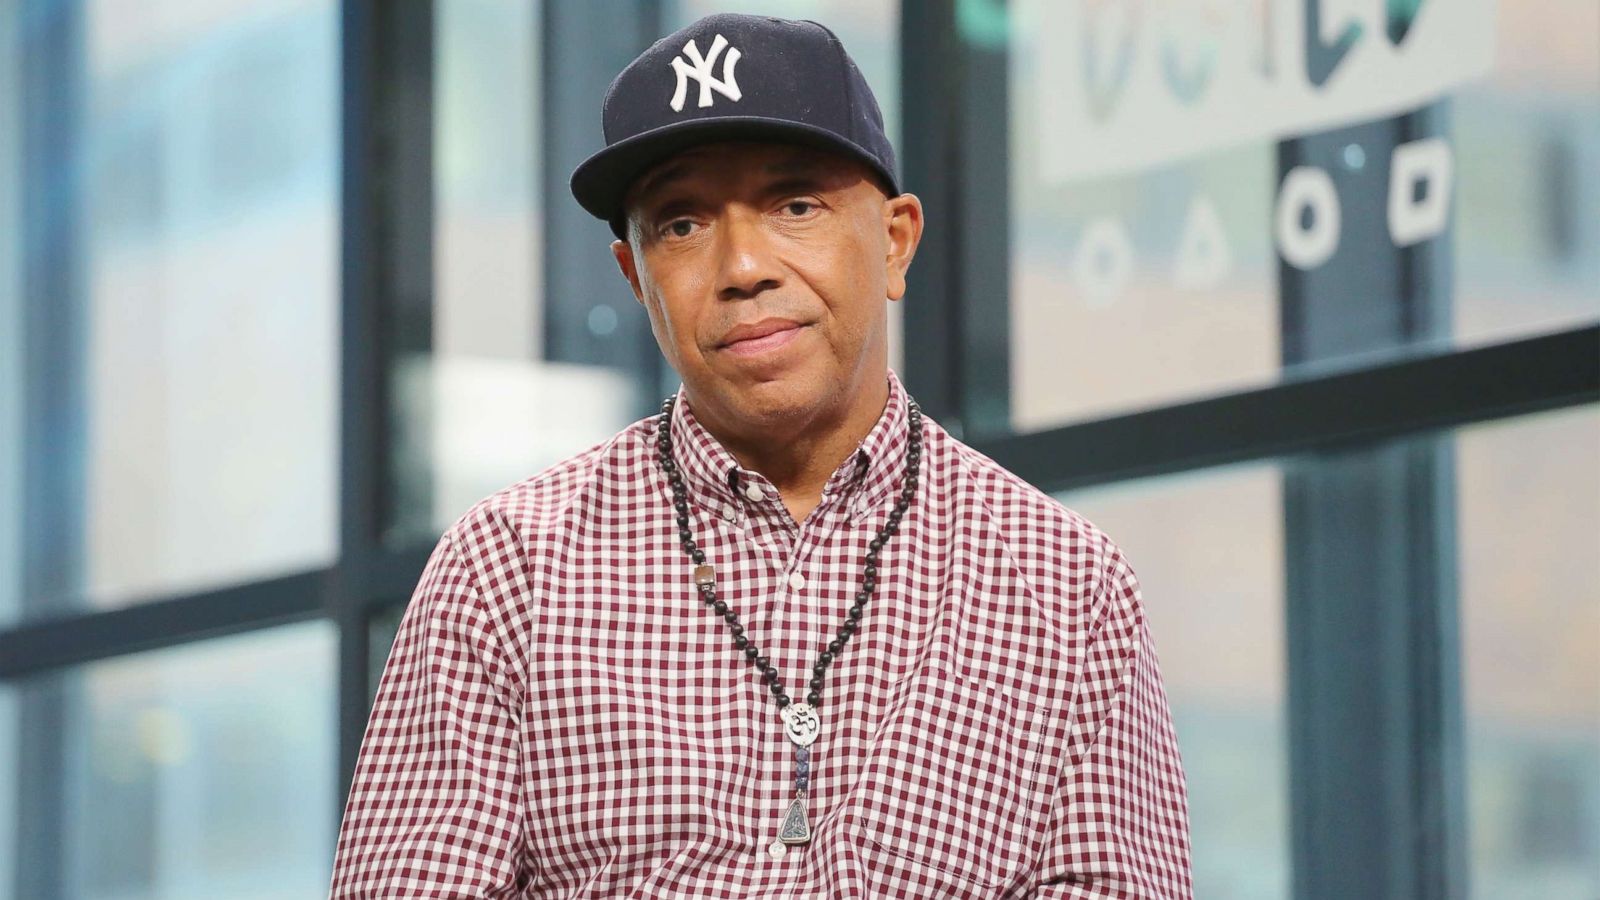 PHOTO: Producer Russell Simmons visits Build to discuss the film, "Romeo Is Bleeding" at Build Studio, July 17, 2017, in New York City.